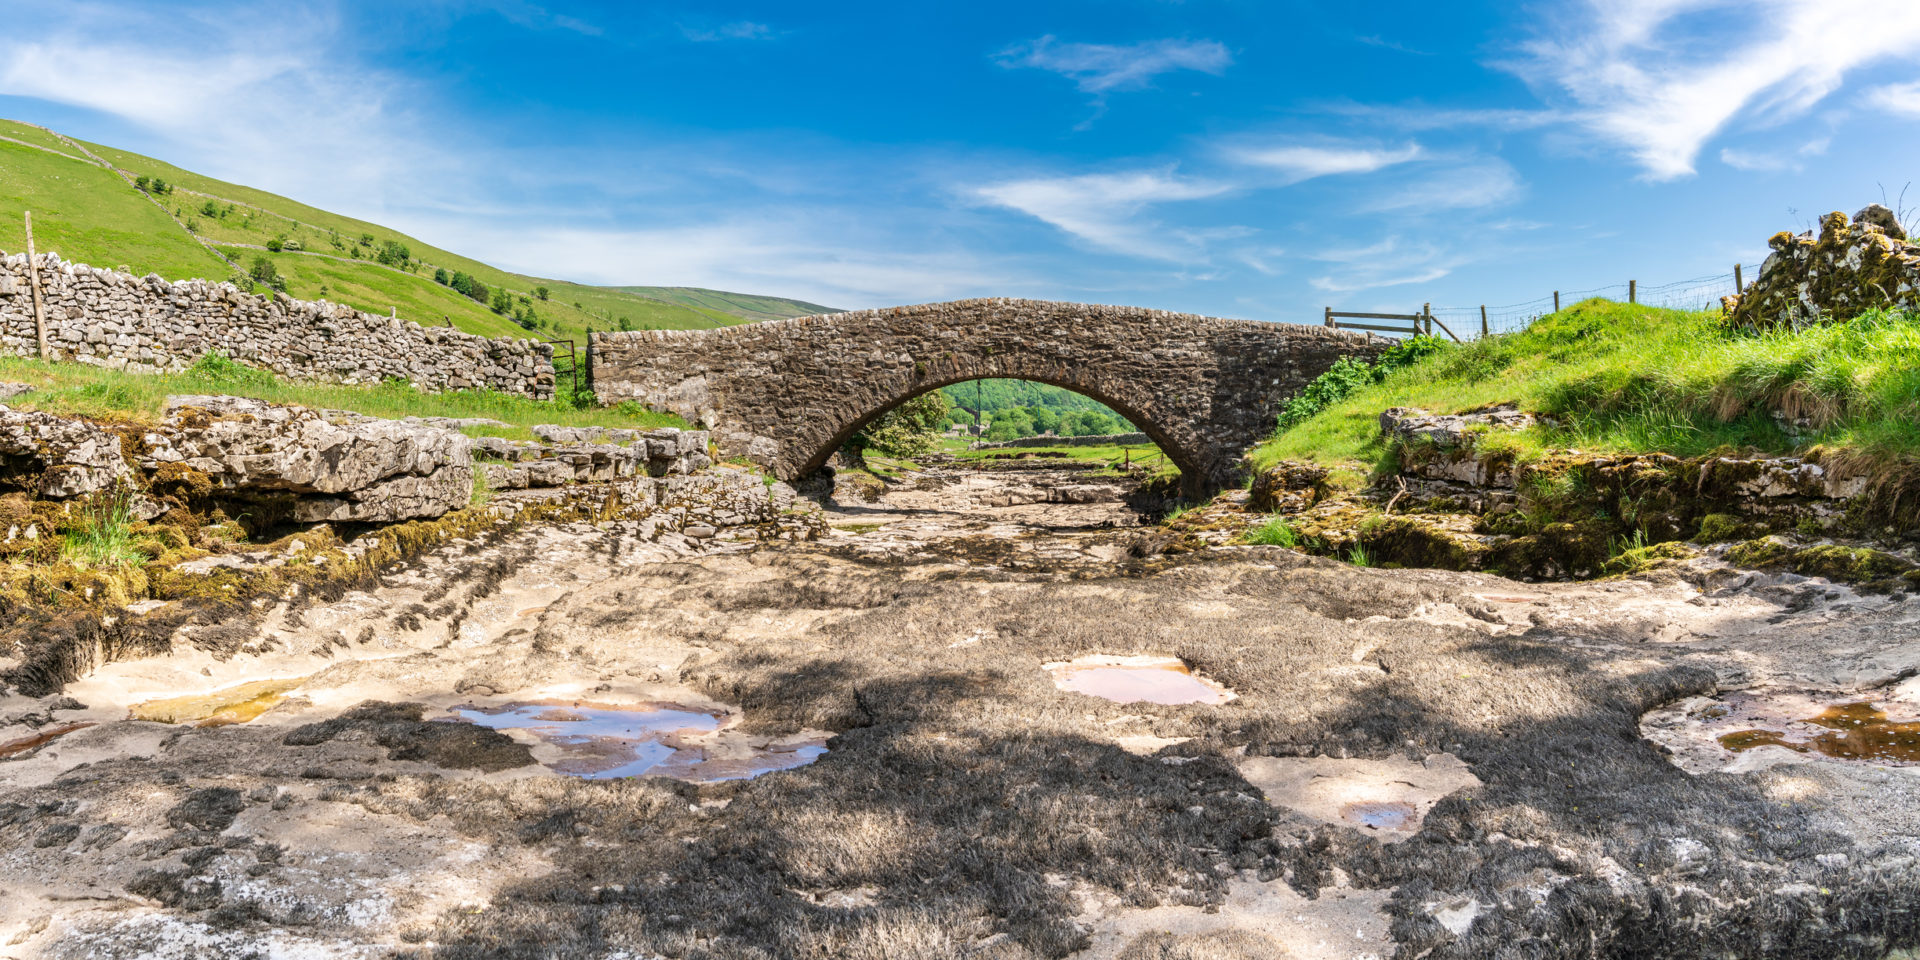 River Skirfare, near Litton, North Yorkshire, England, during drought conditions (Image: Dreamstime)